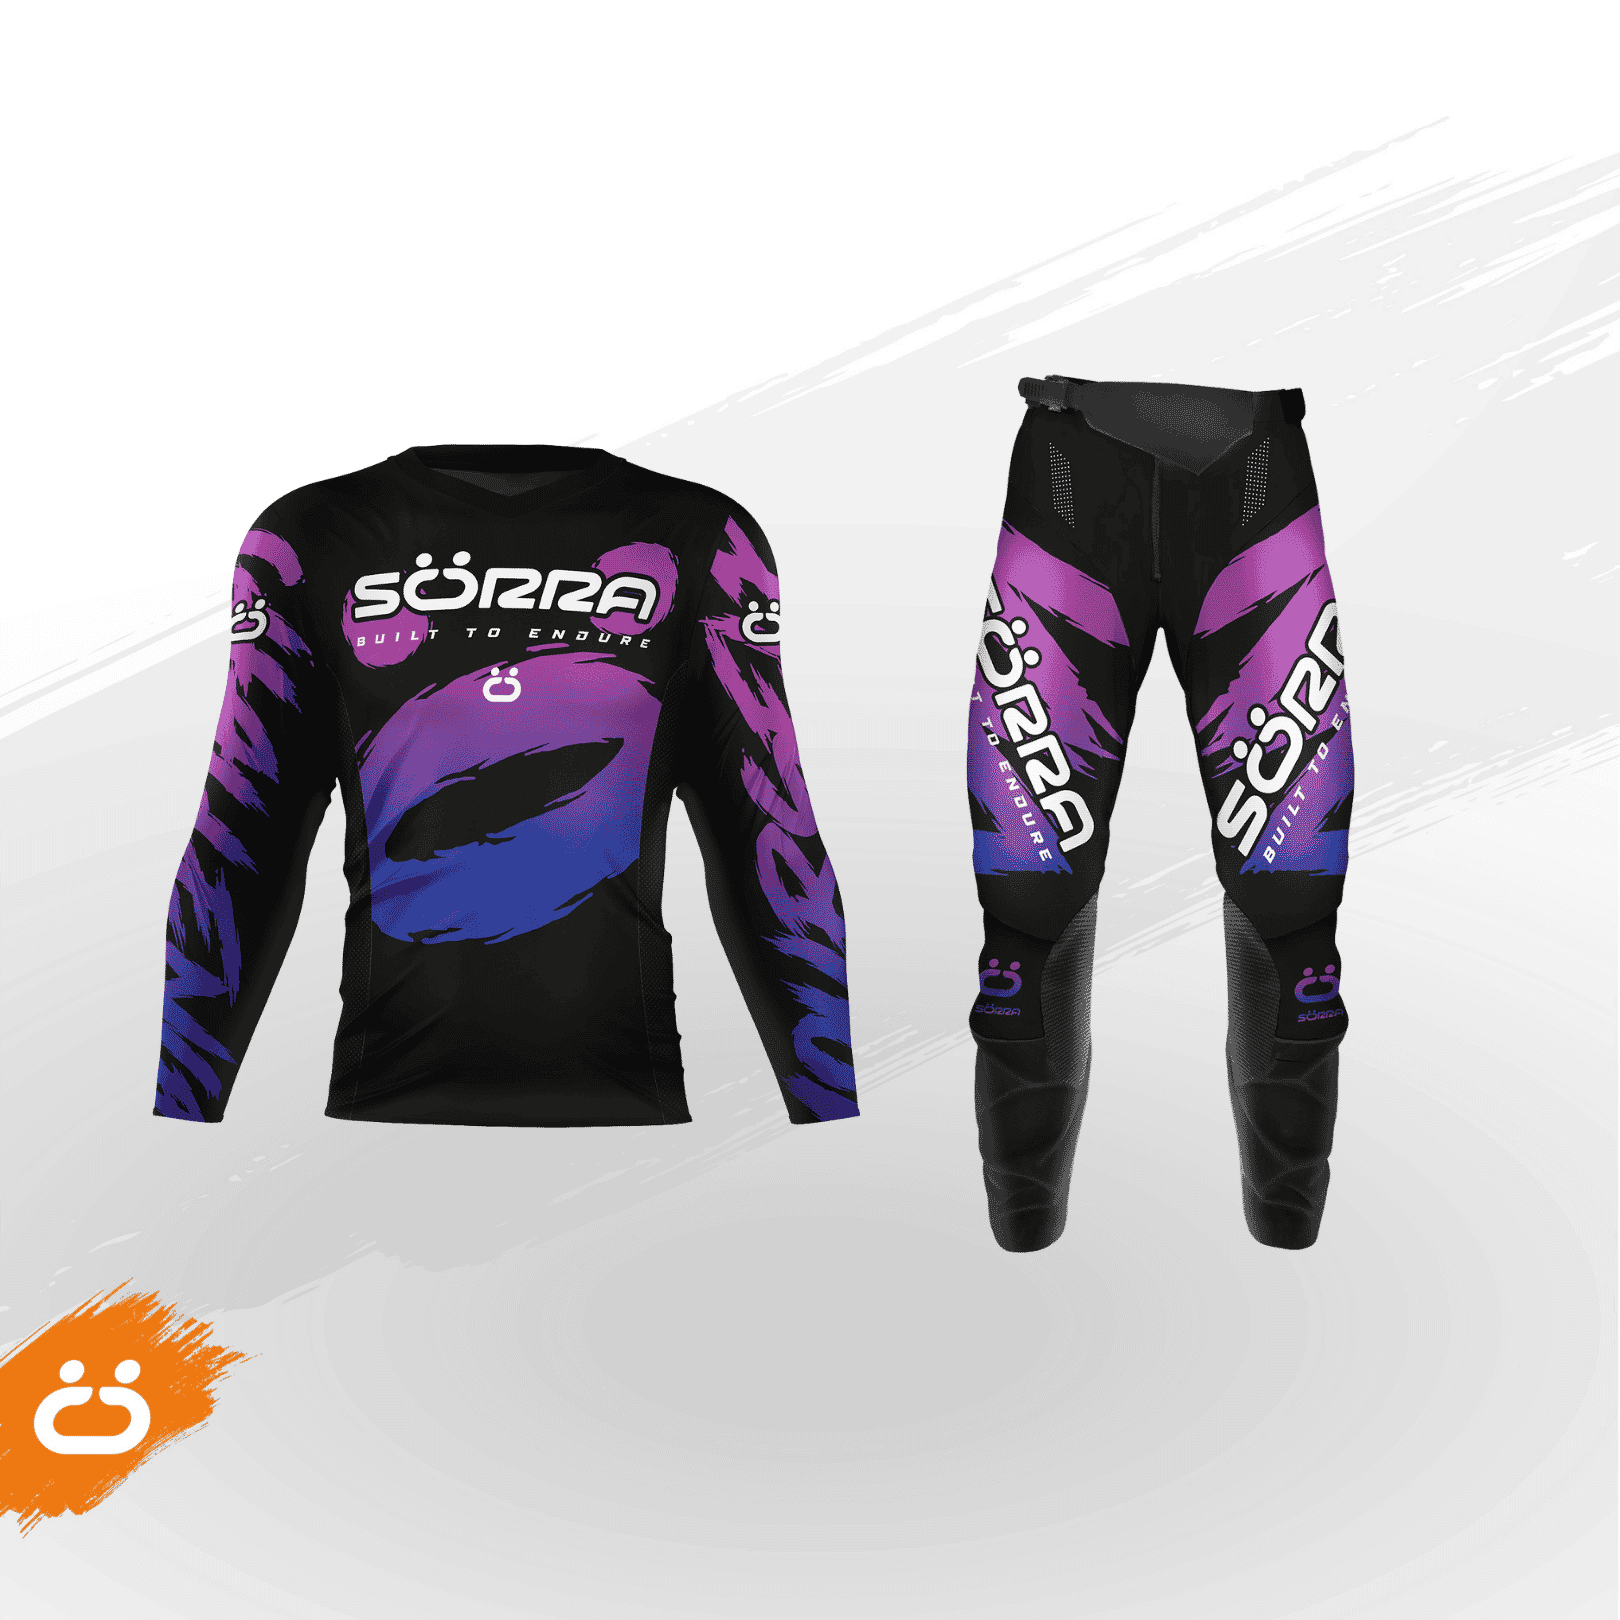 ▷ Sets Enduro and motocross brands